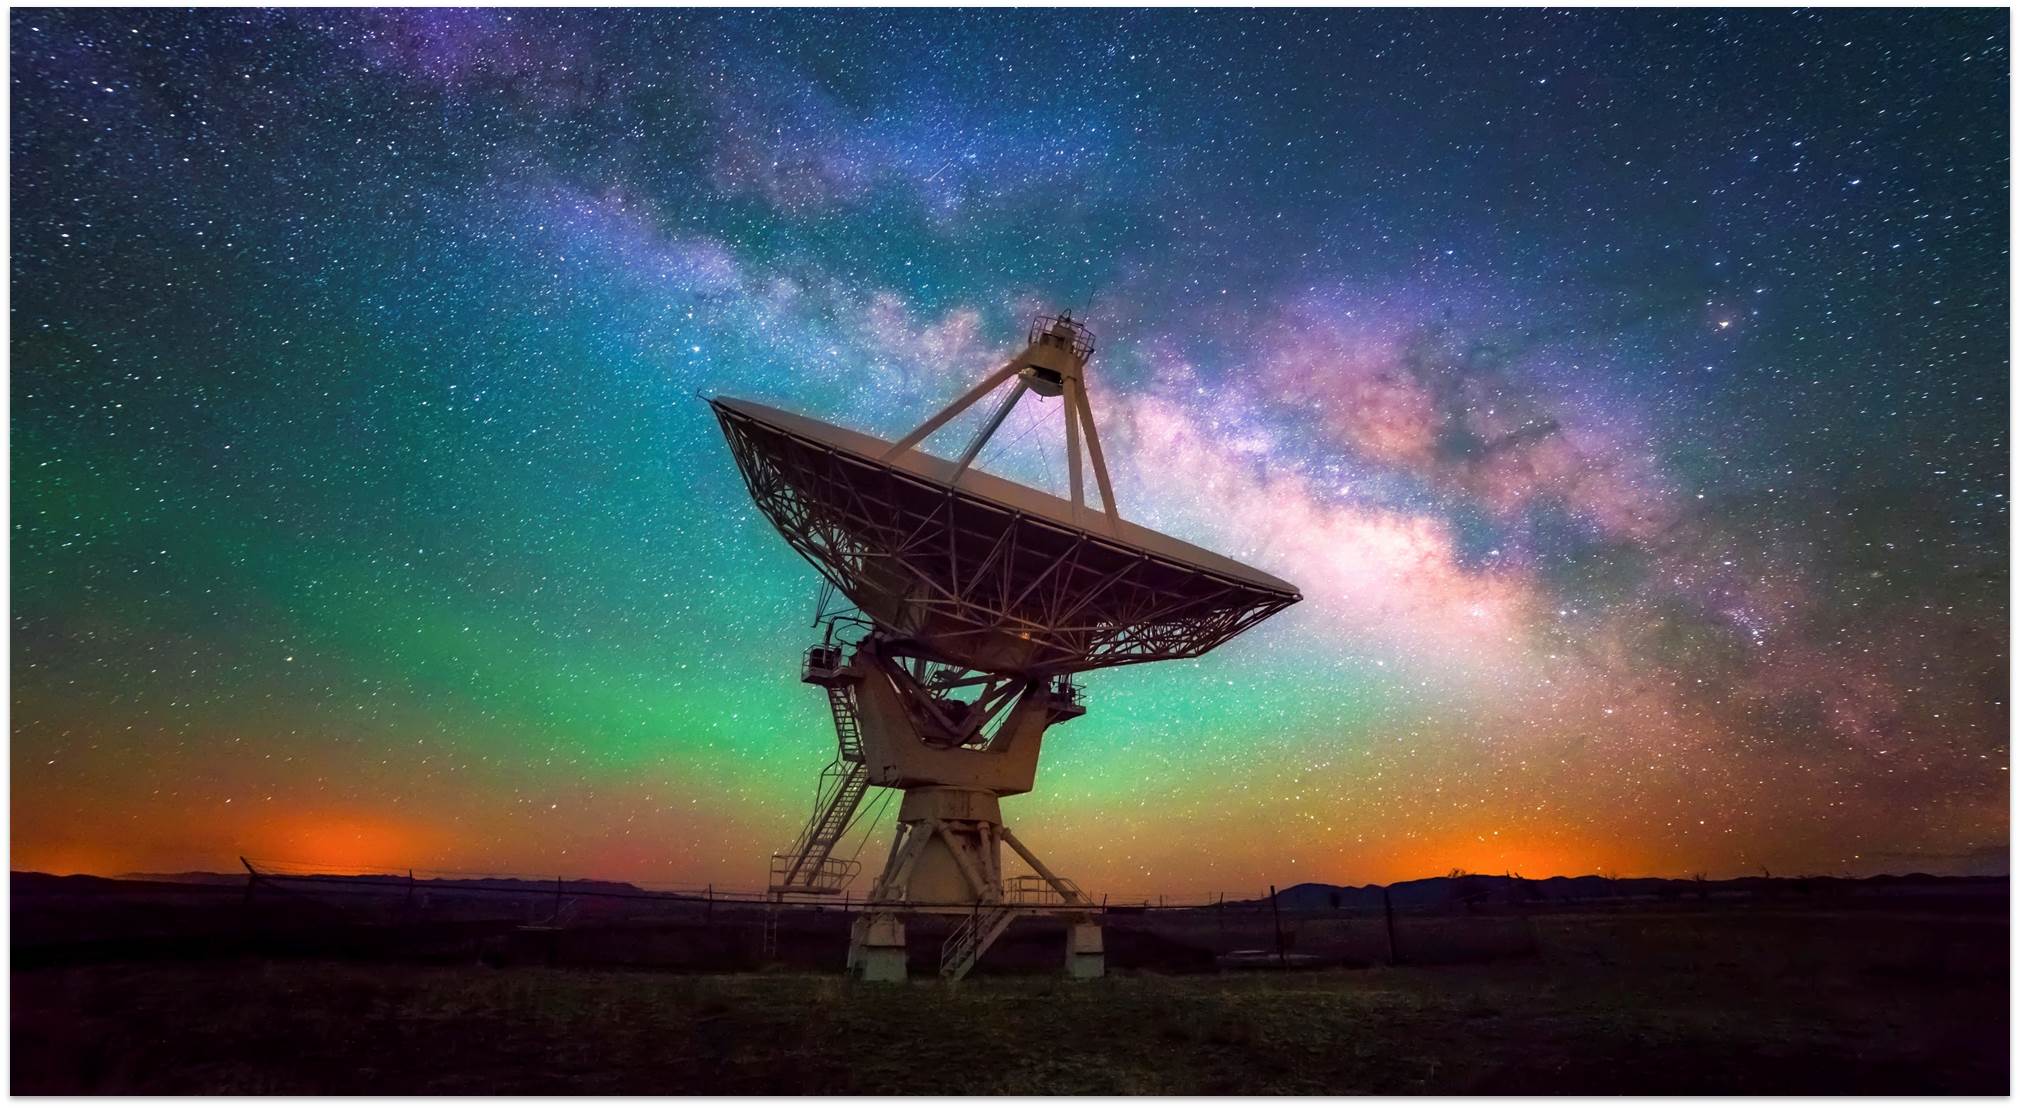 Signal dish in front of a starry, colorful sky